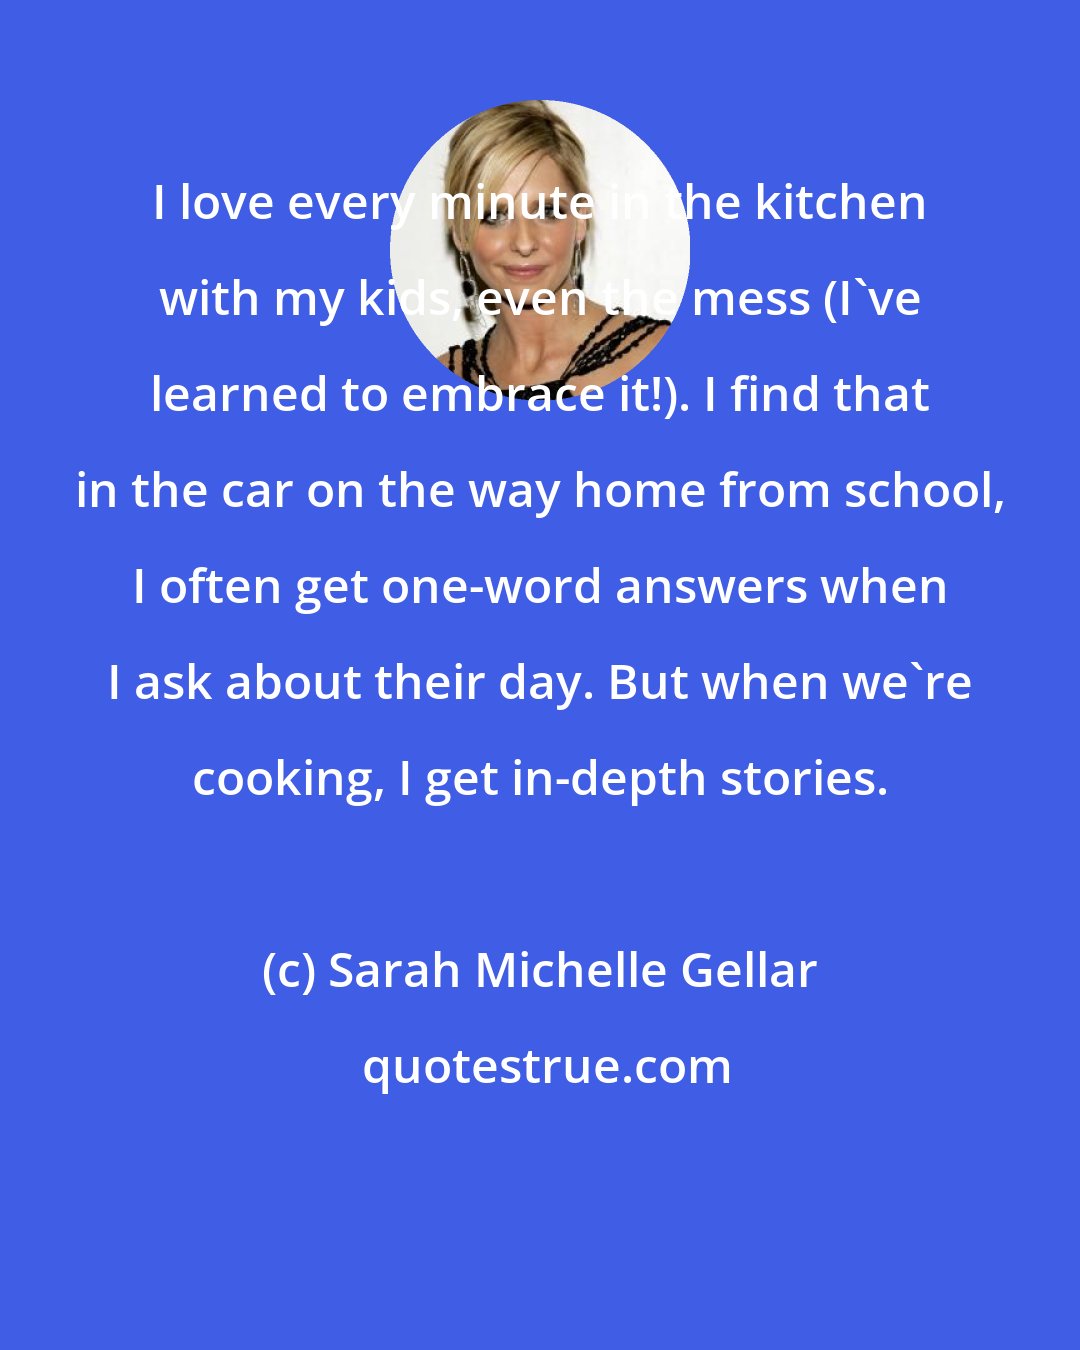 Sarah Michelle Gellar: I love every minute in the kitchen with my kids, even the mess (I've learned to embrace it!). I find that in the car on the way home from school, I often get one-word answers when I ask about their day. But when we're cooking, I get in-depth stories.